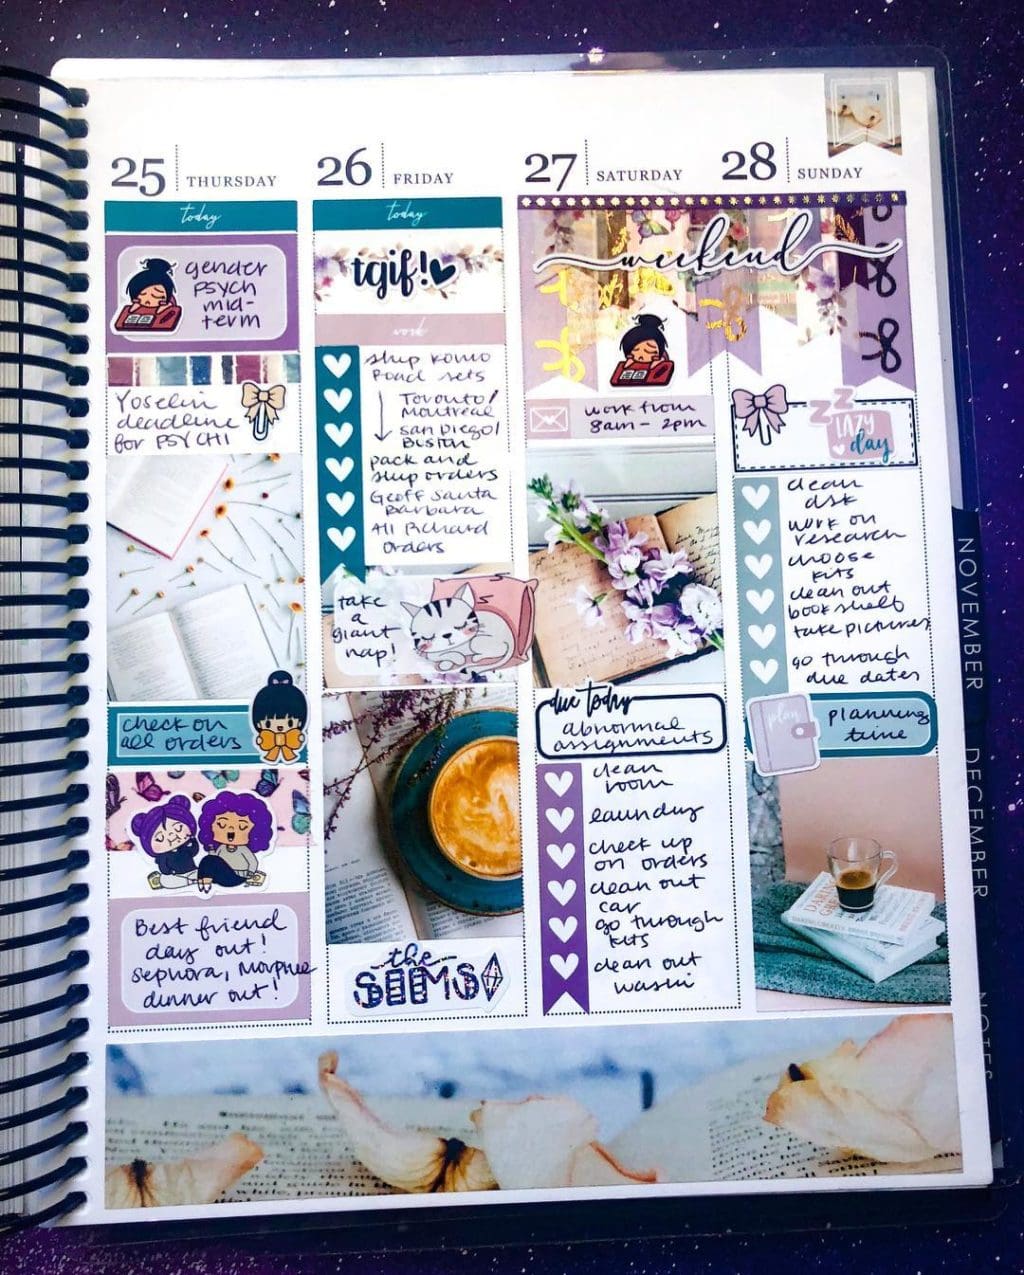 Check out this post for awesome bullet journal theme ideas. | Discover your new favorite bullet journal layouts. #planning #gtd #purpose #morningroutine #planners #lifestyle #productivitytips